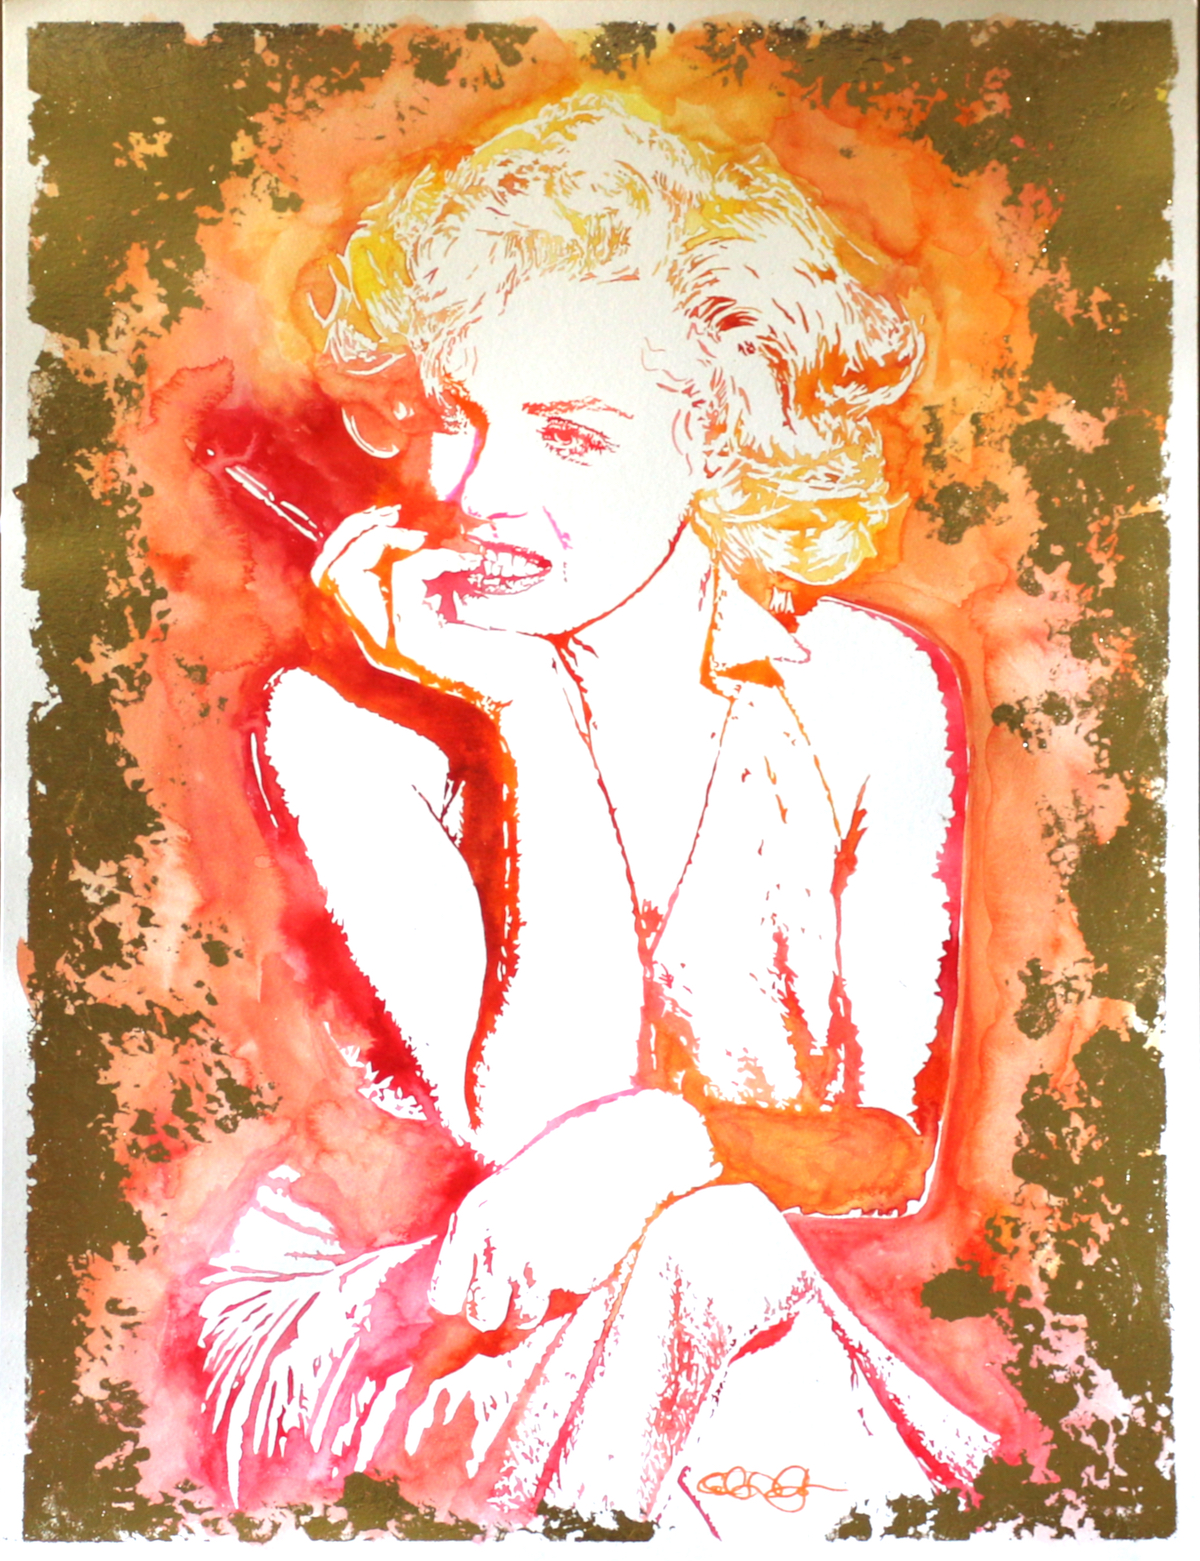 Watercolor and goldleaf painting of Marilyn Monroe